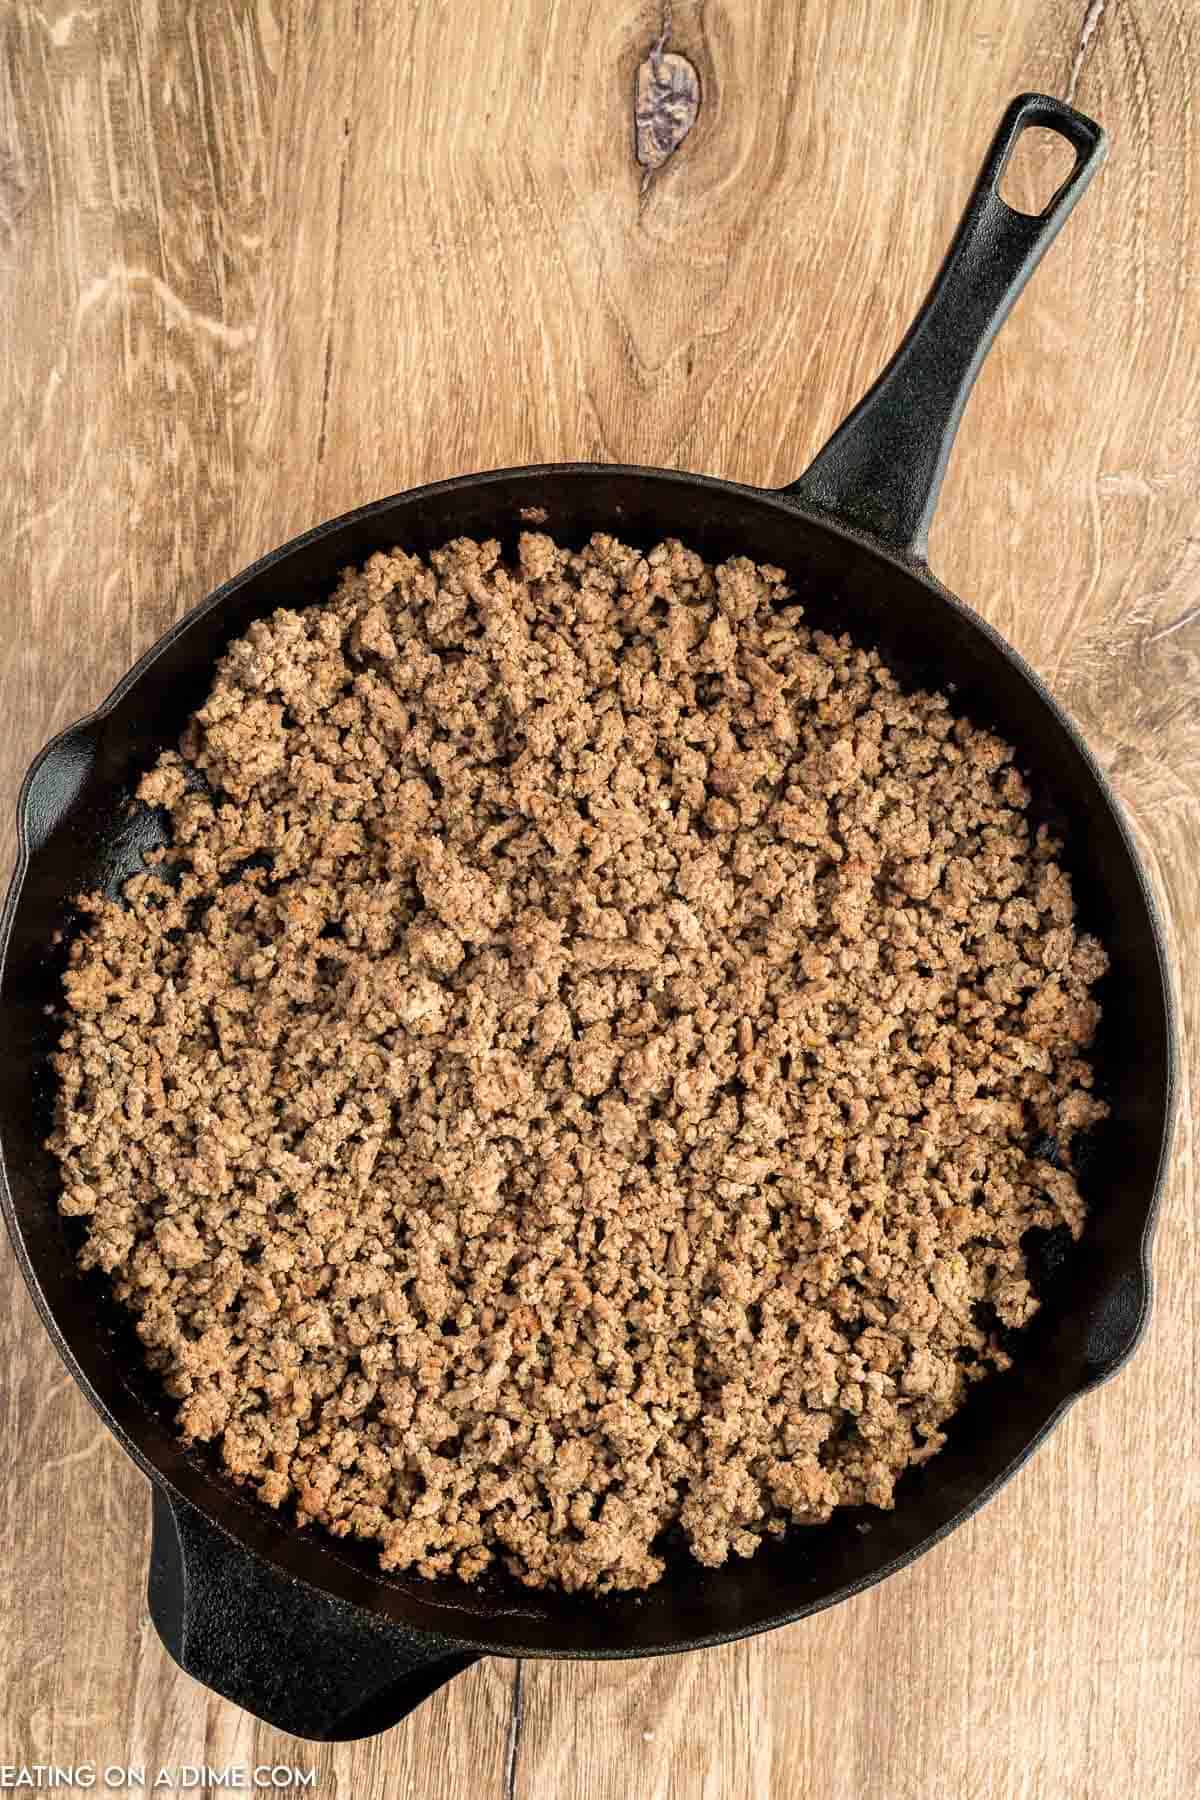 Cooked ground beef in a cast iron skillet